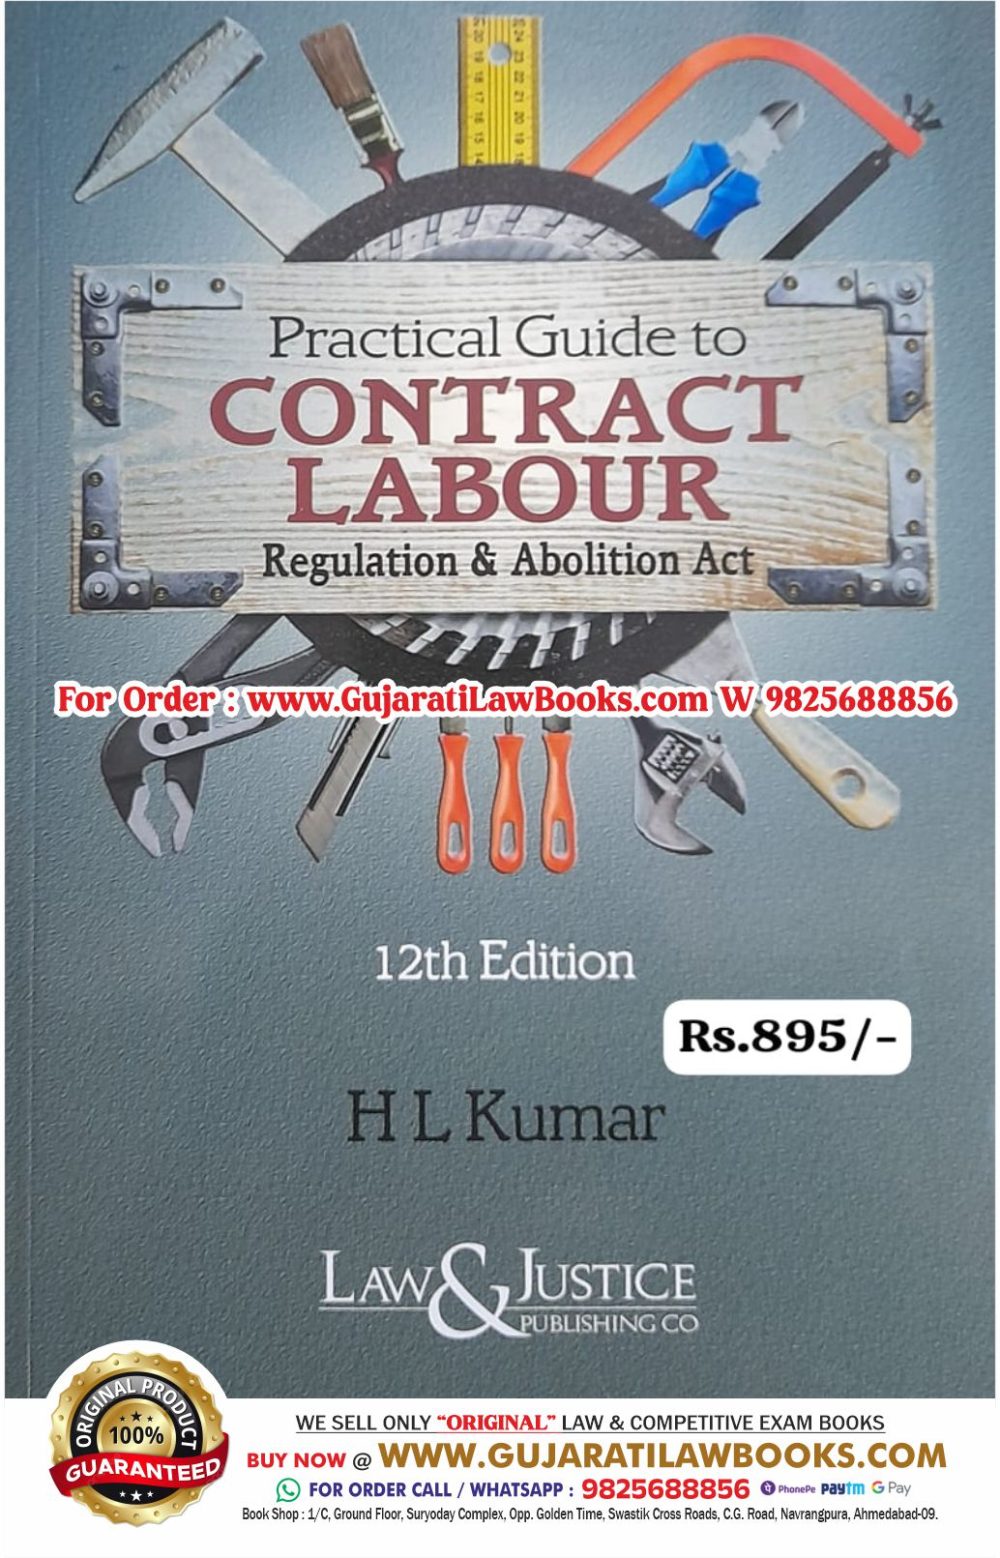 Practical Guide to CONTRACT LABOUR REGULATION & ABOLITION ACT by H L Kumar - Latest 12th Edition 2024 Law & Justice